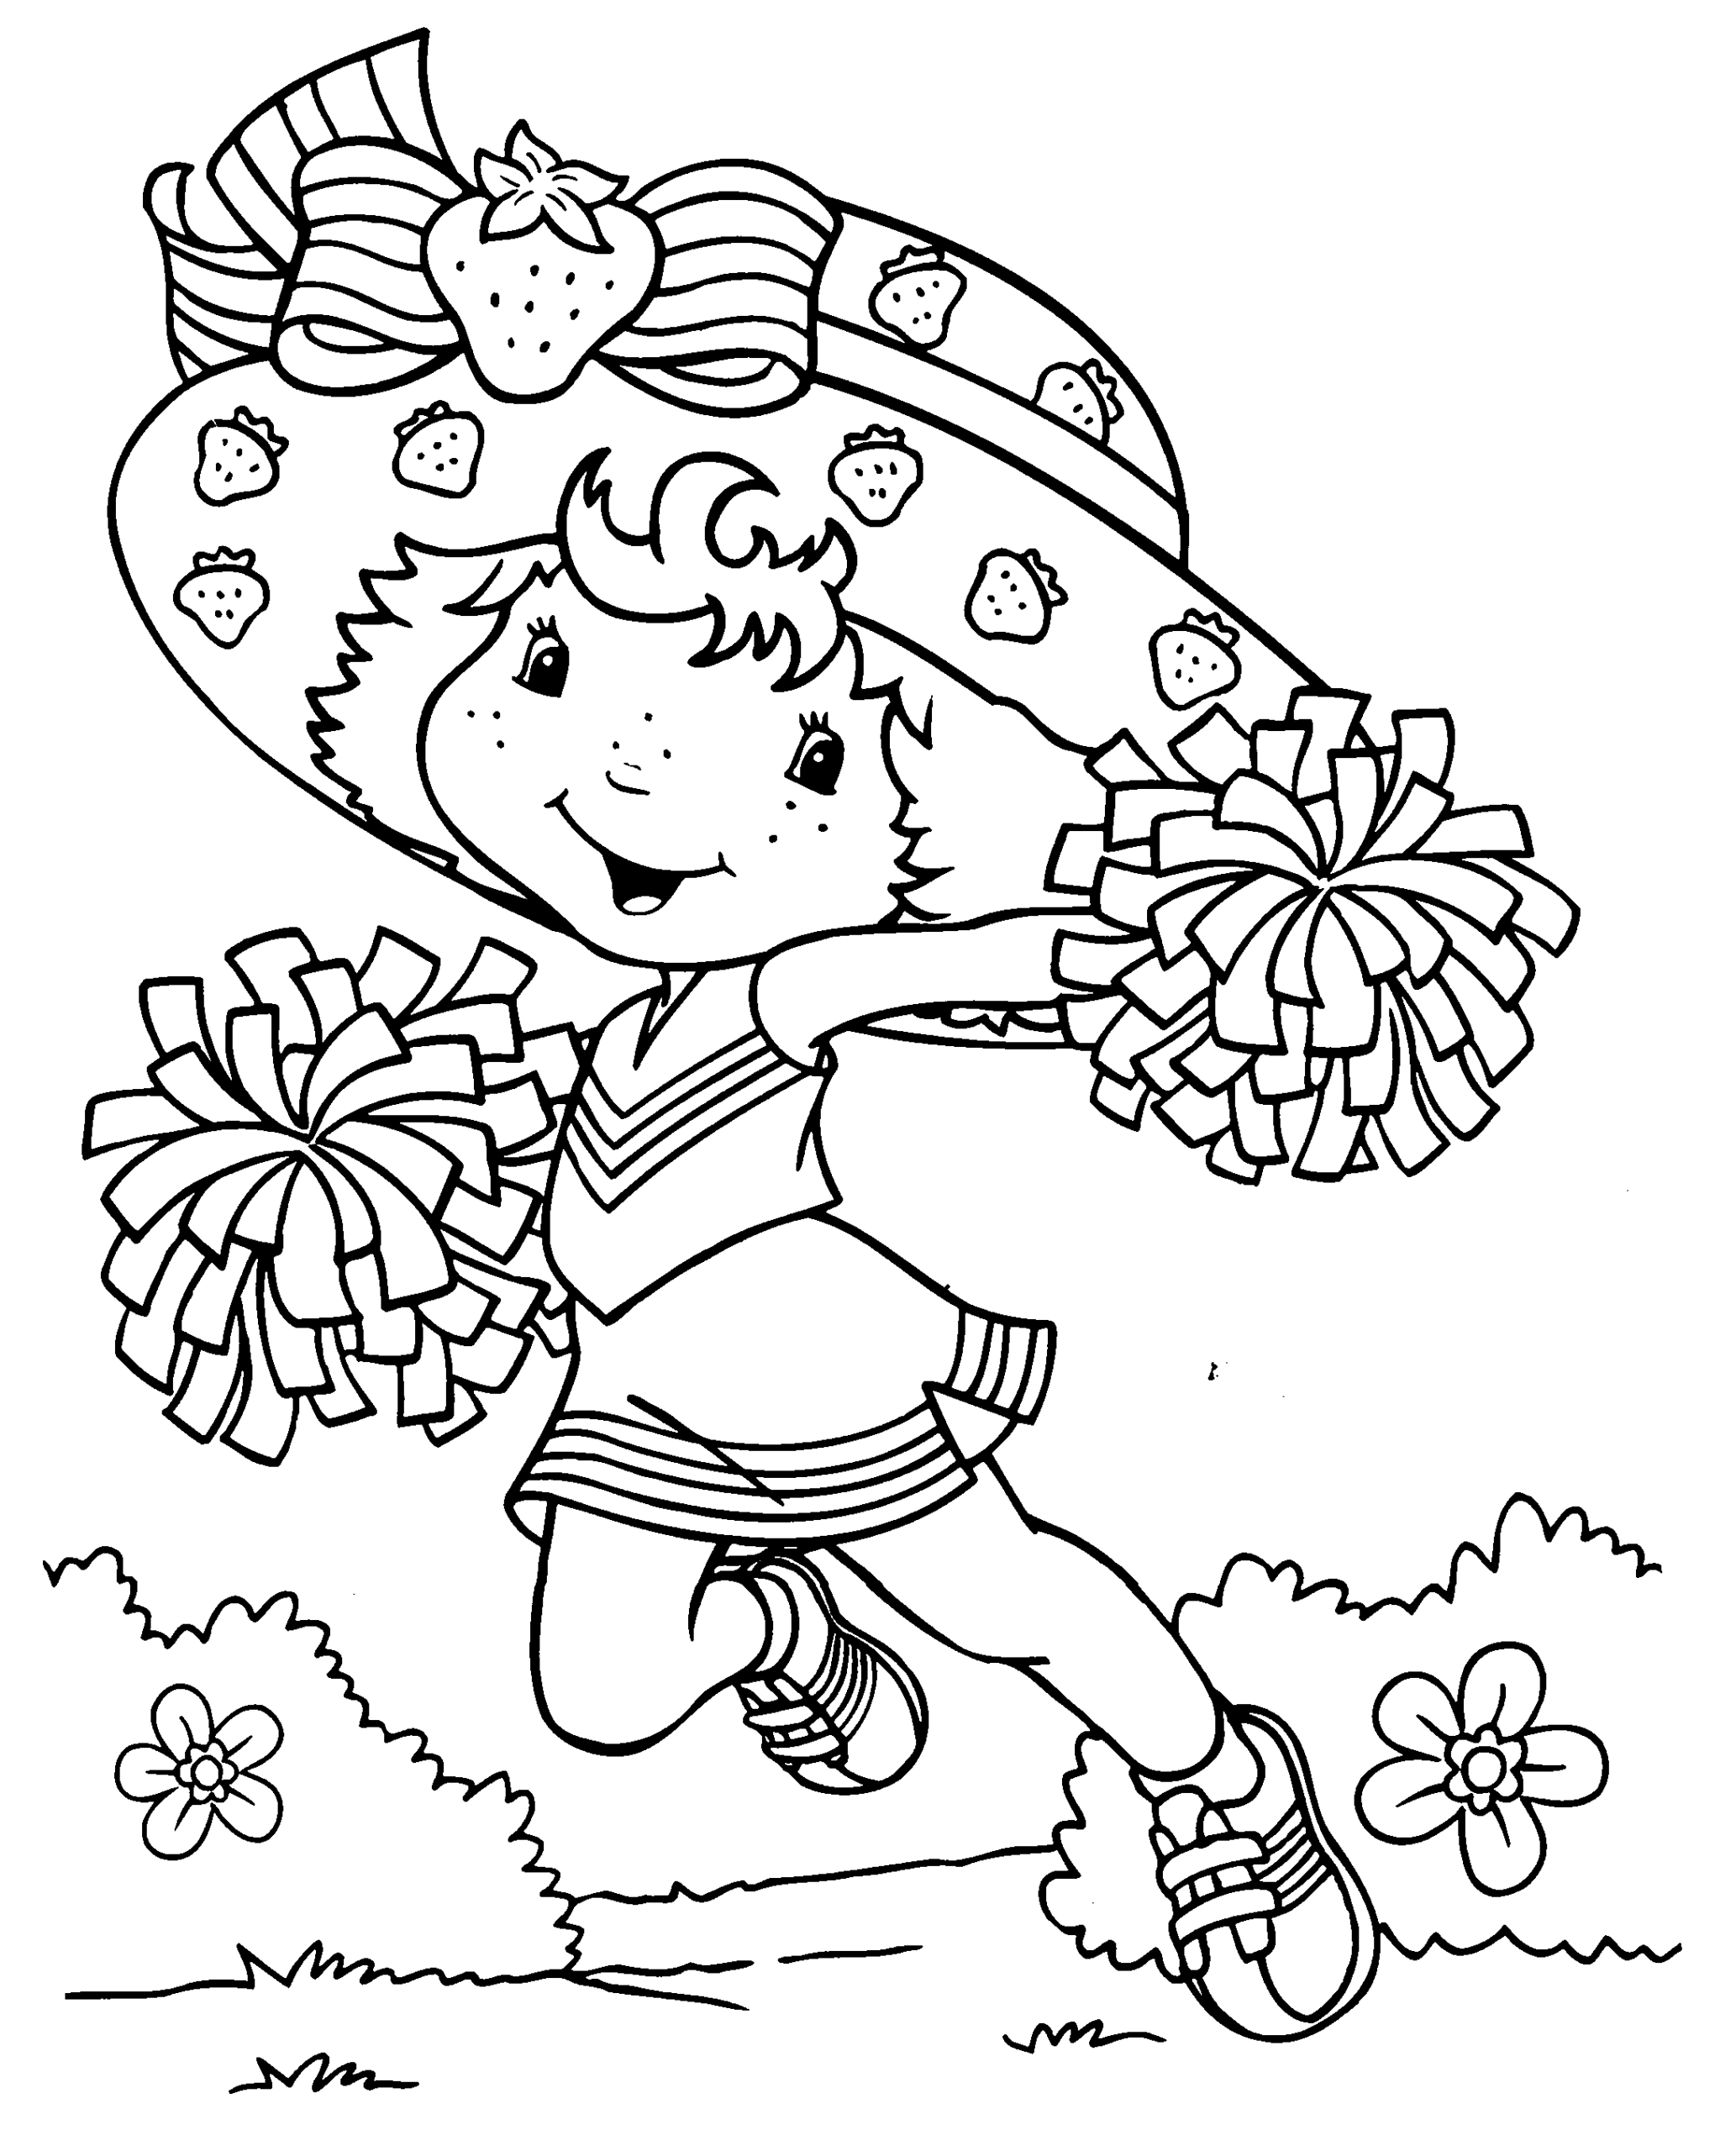 Strawberry Shortcake Coloring Pages TV Film Printable 2020 08177 Coloring4free